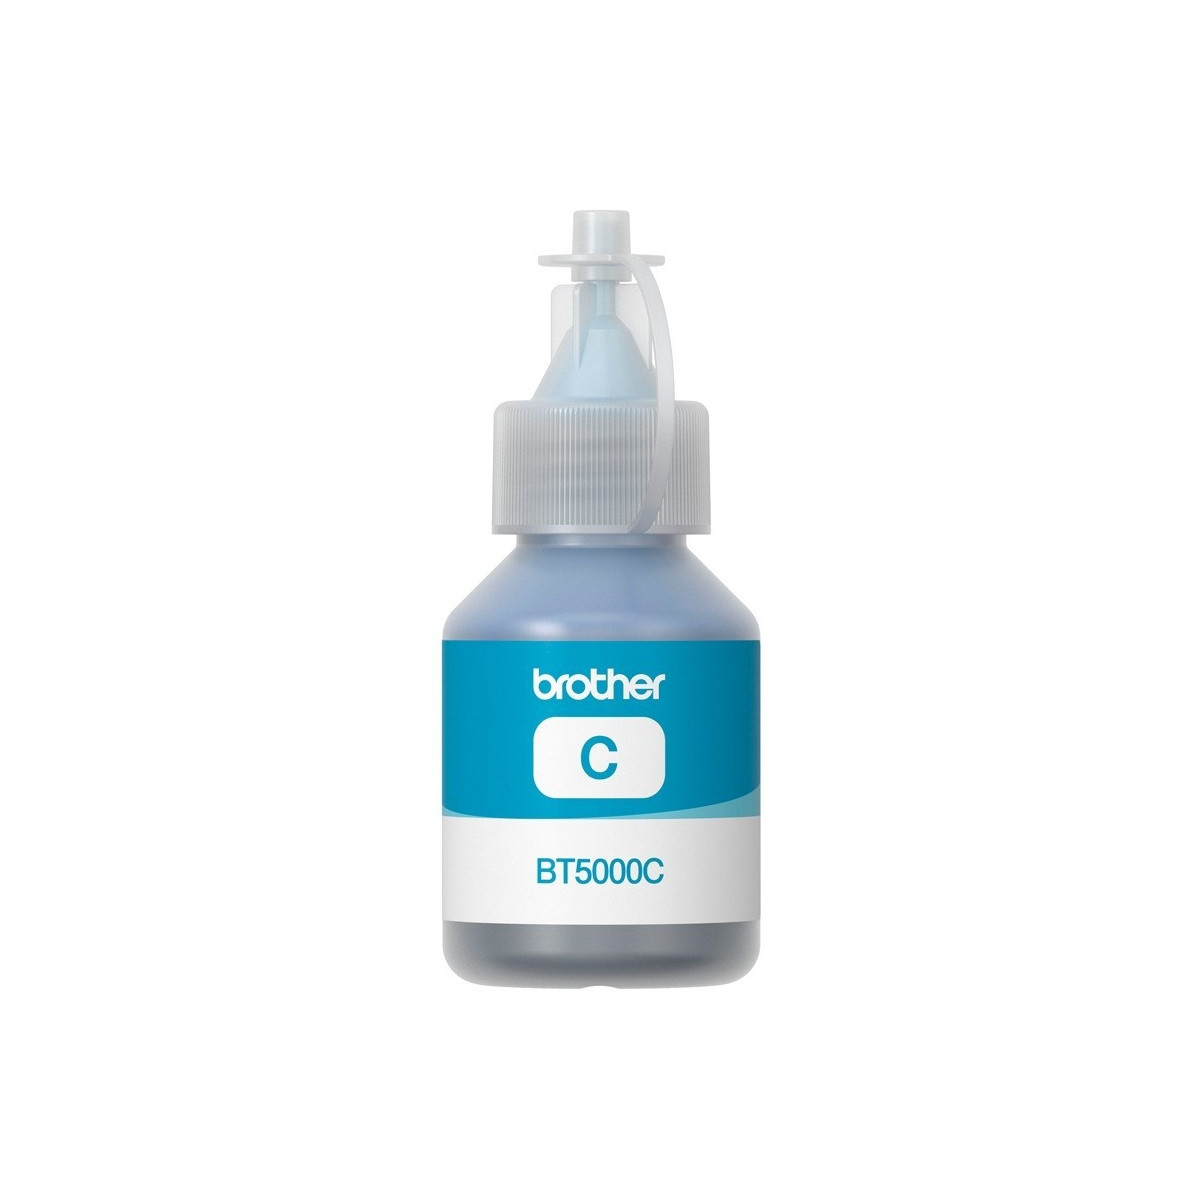 BOUTEILLE D'ENCRE ADAPTABLE BROTHER BT5000C - 50ML - CYAN